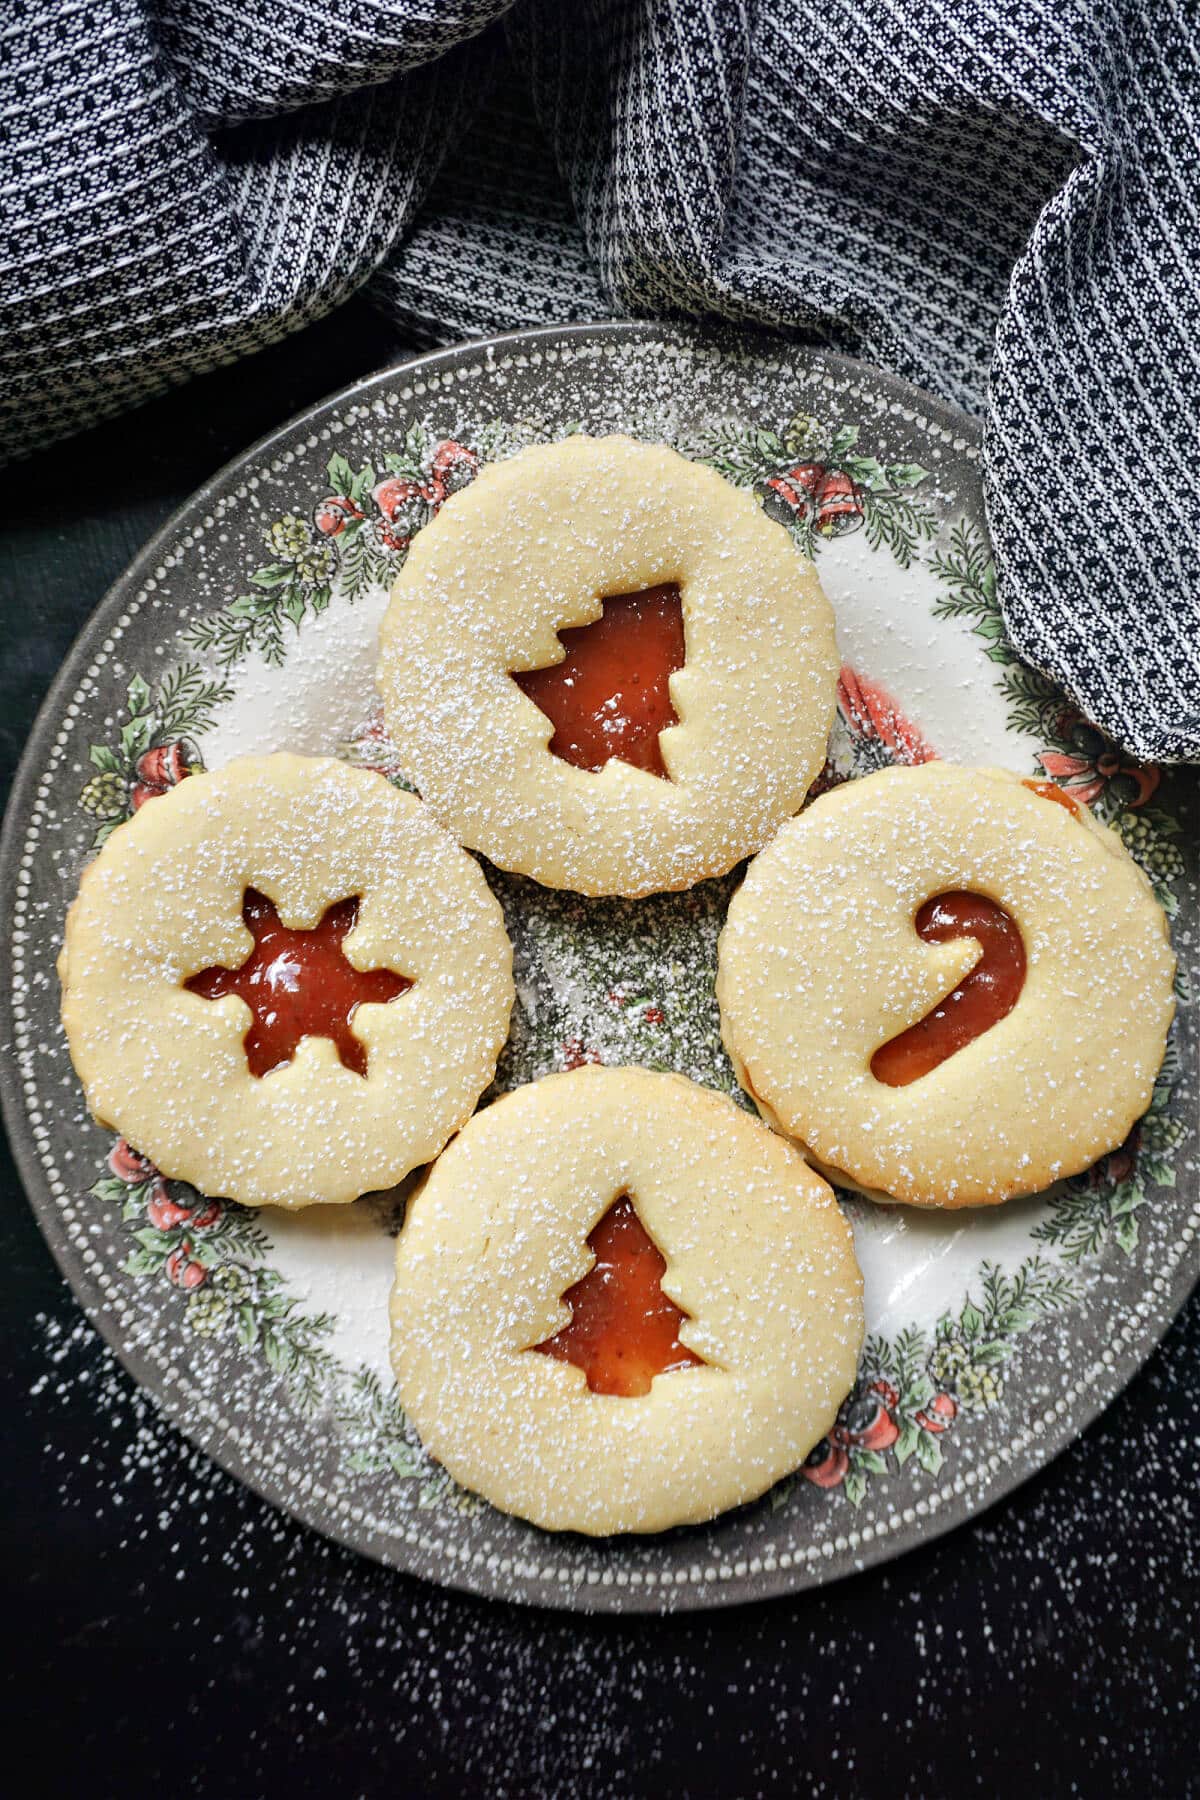 A plate with 4 linzer cookies.